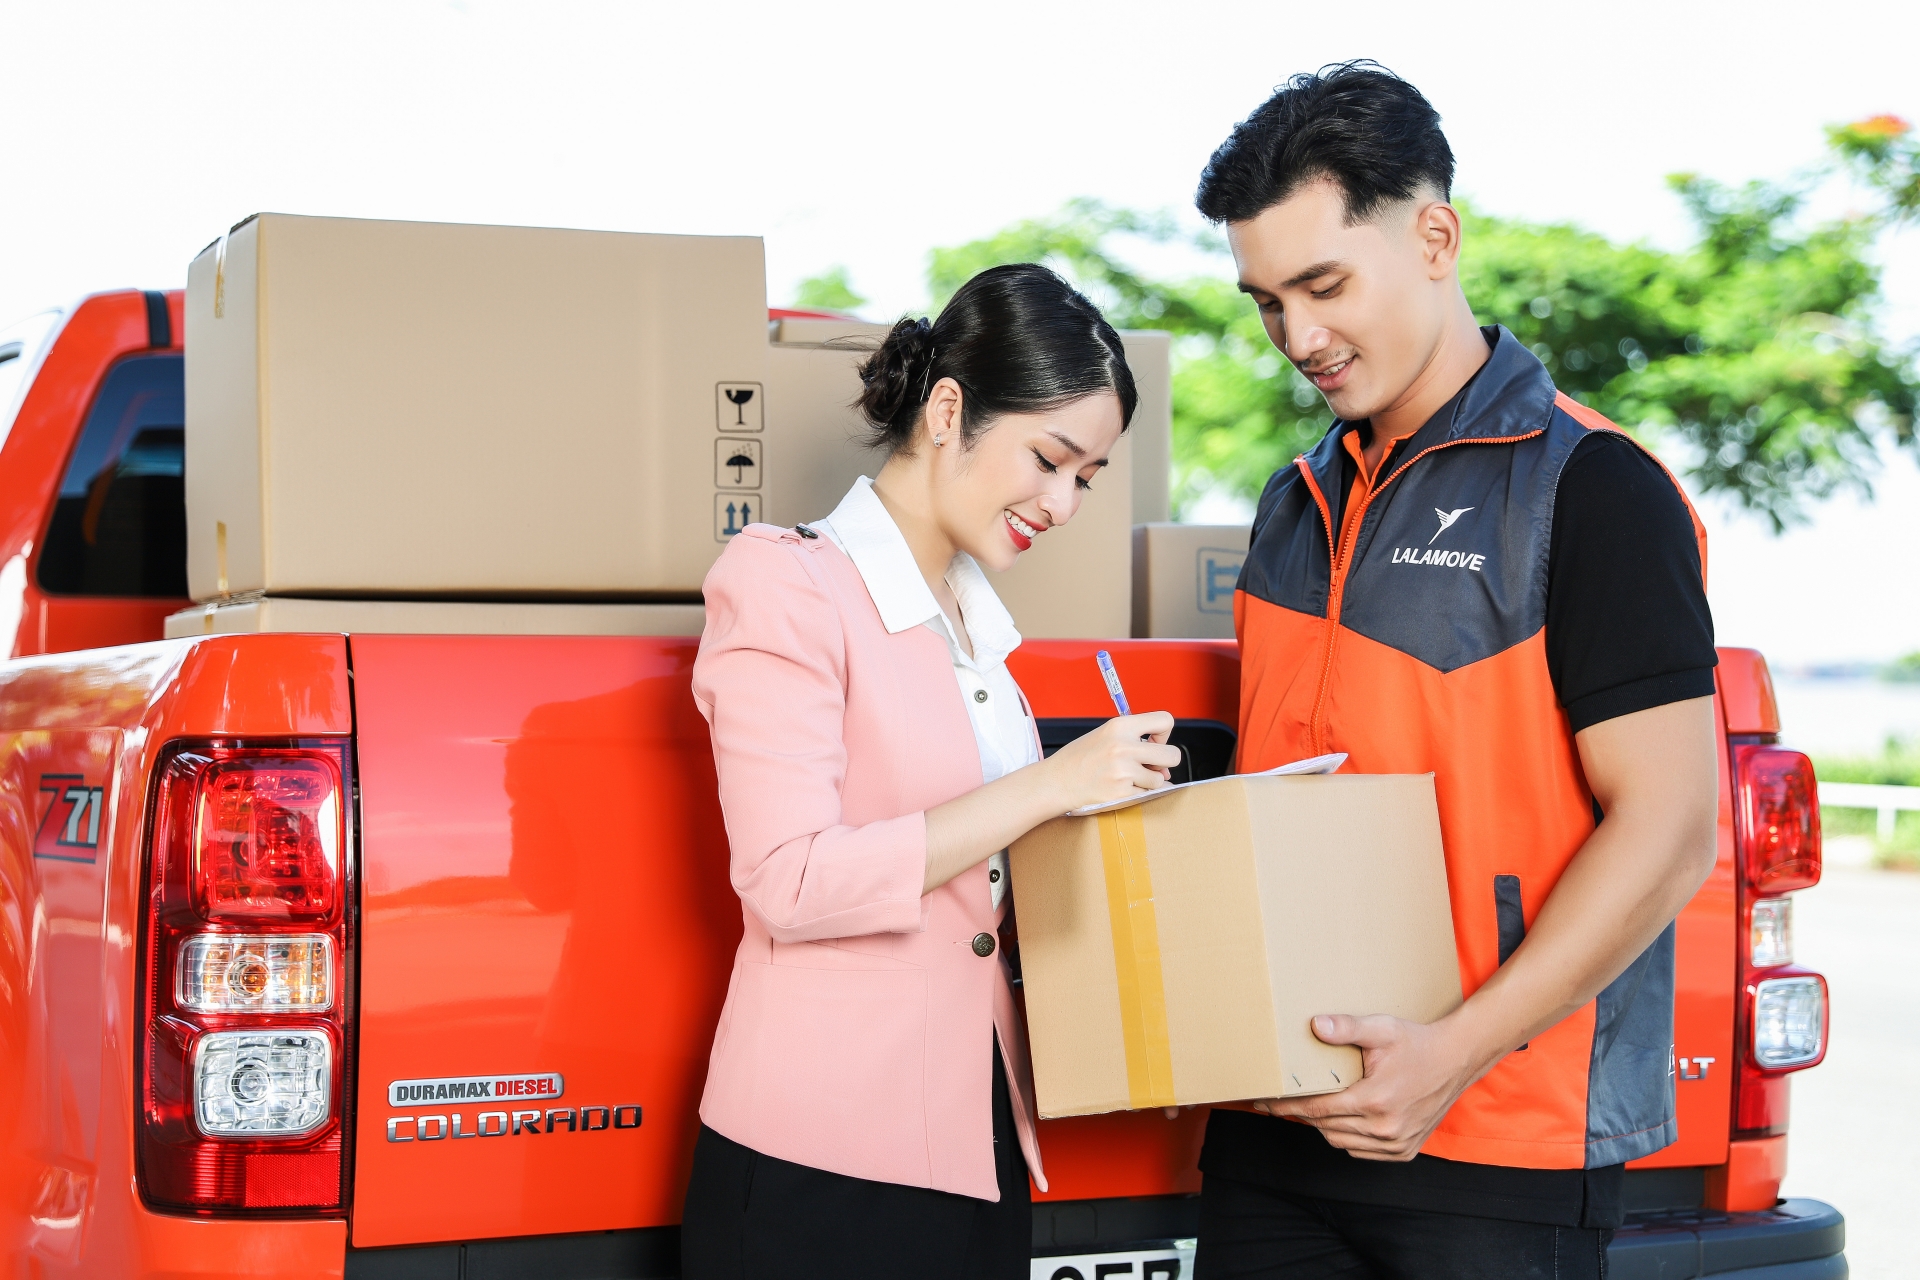 lalamove ramps up truck delivery services in vietnam